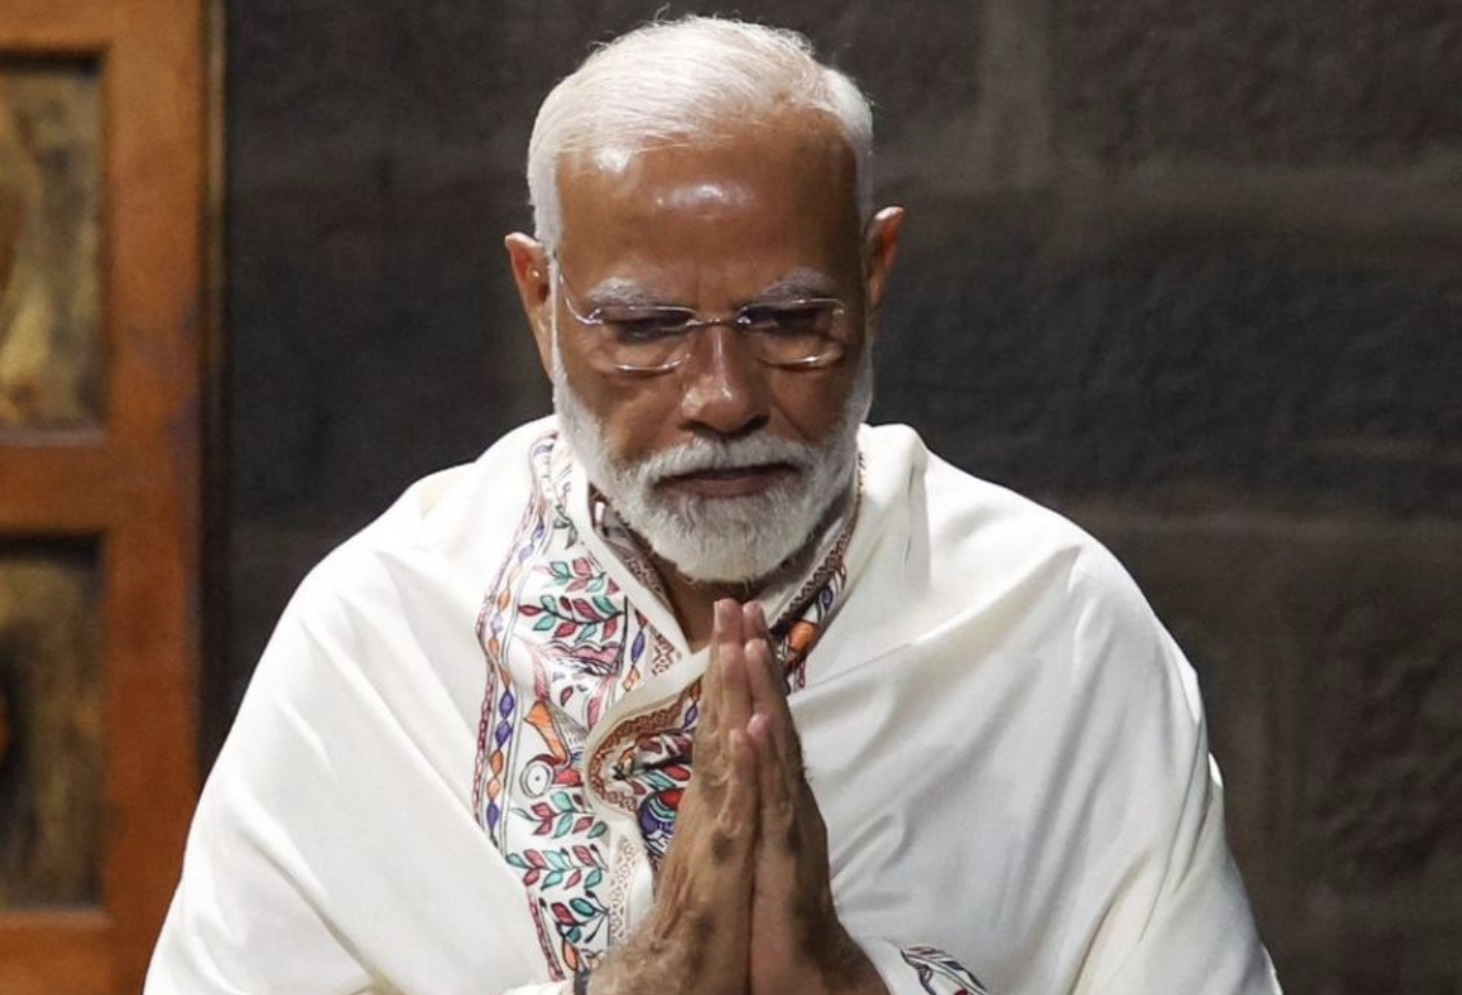 PM Modi started 45 hours of meditation, tight security on the beach